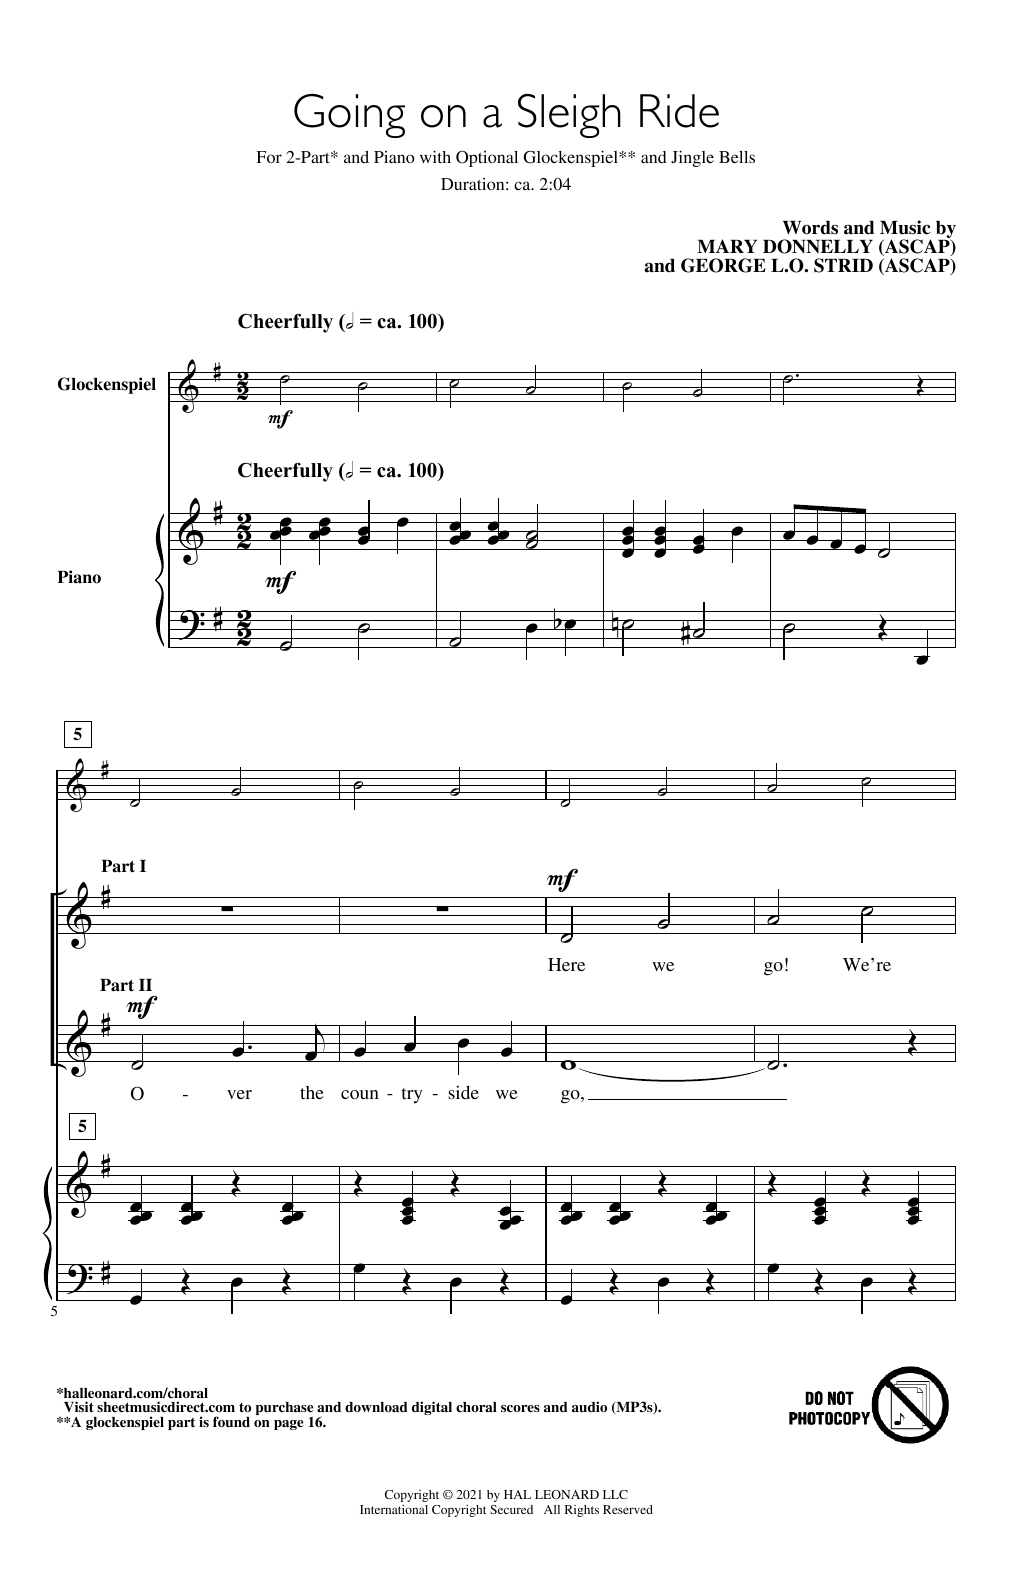 Download Mary Donnelly and George L.O. Strid Going On A Sleigh Ride Sheet Music